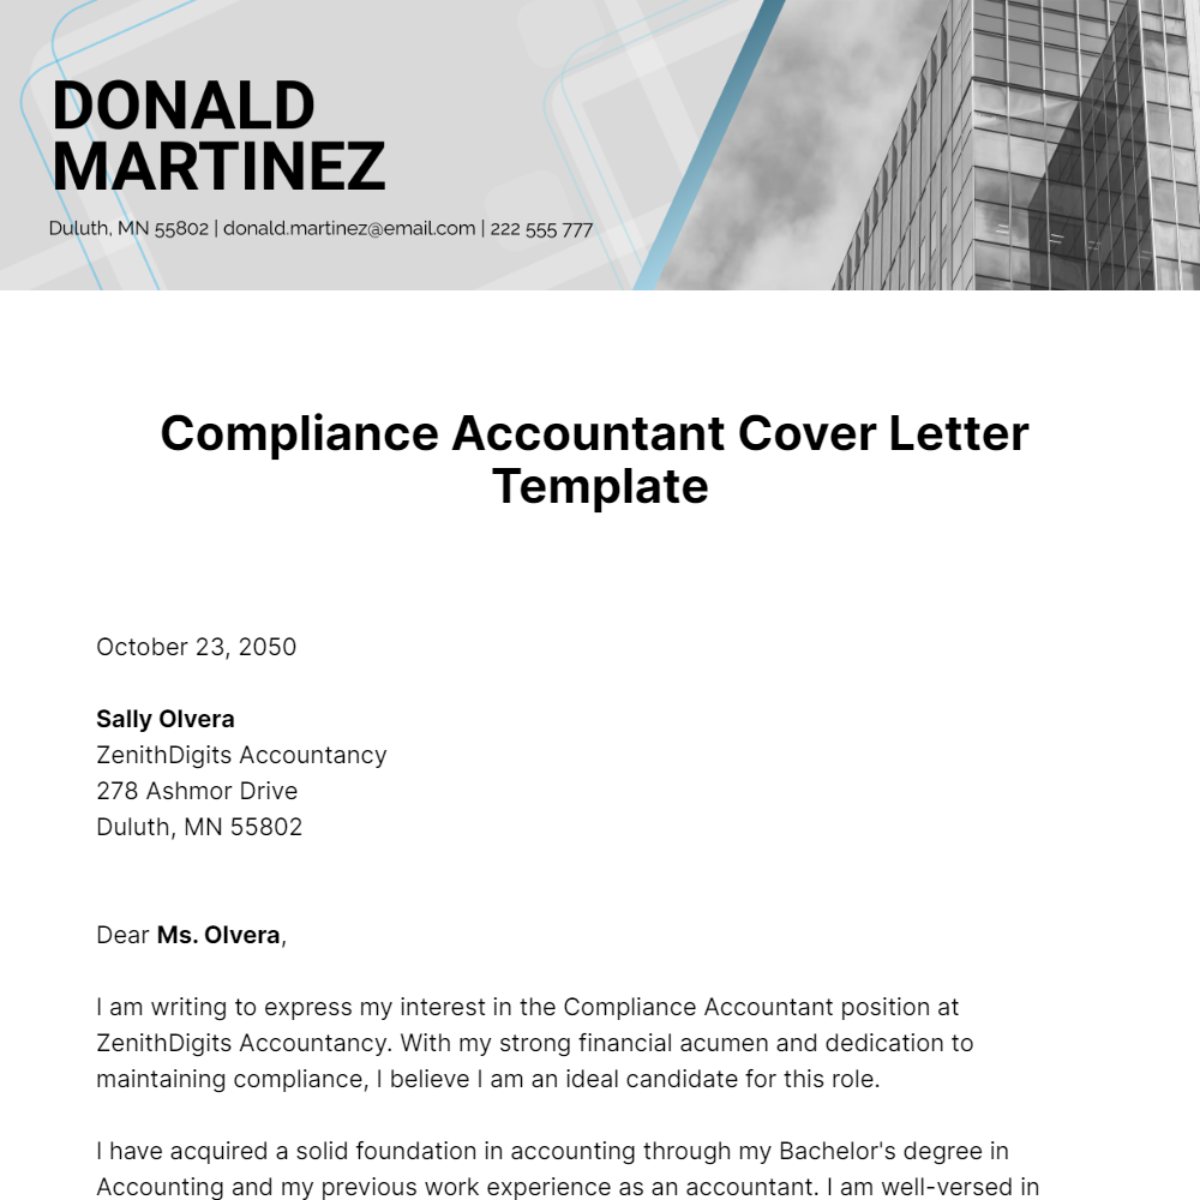 Compliance Accountant Cover Letter Template